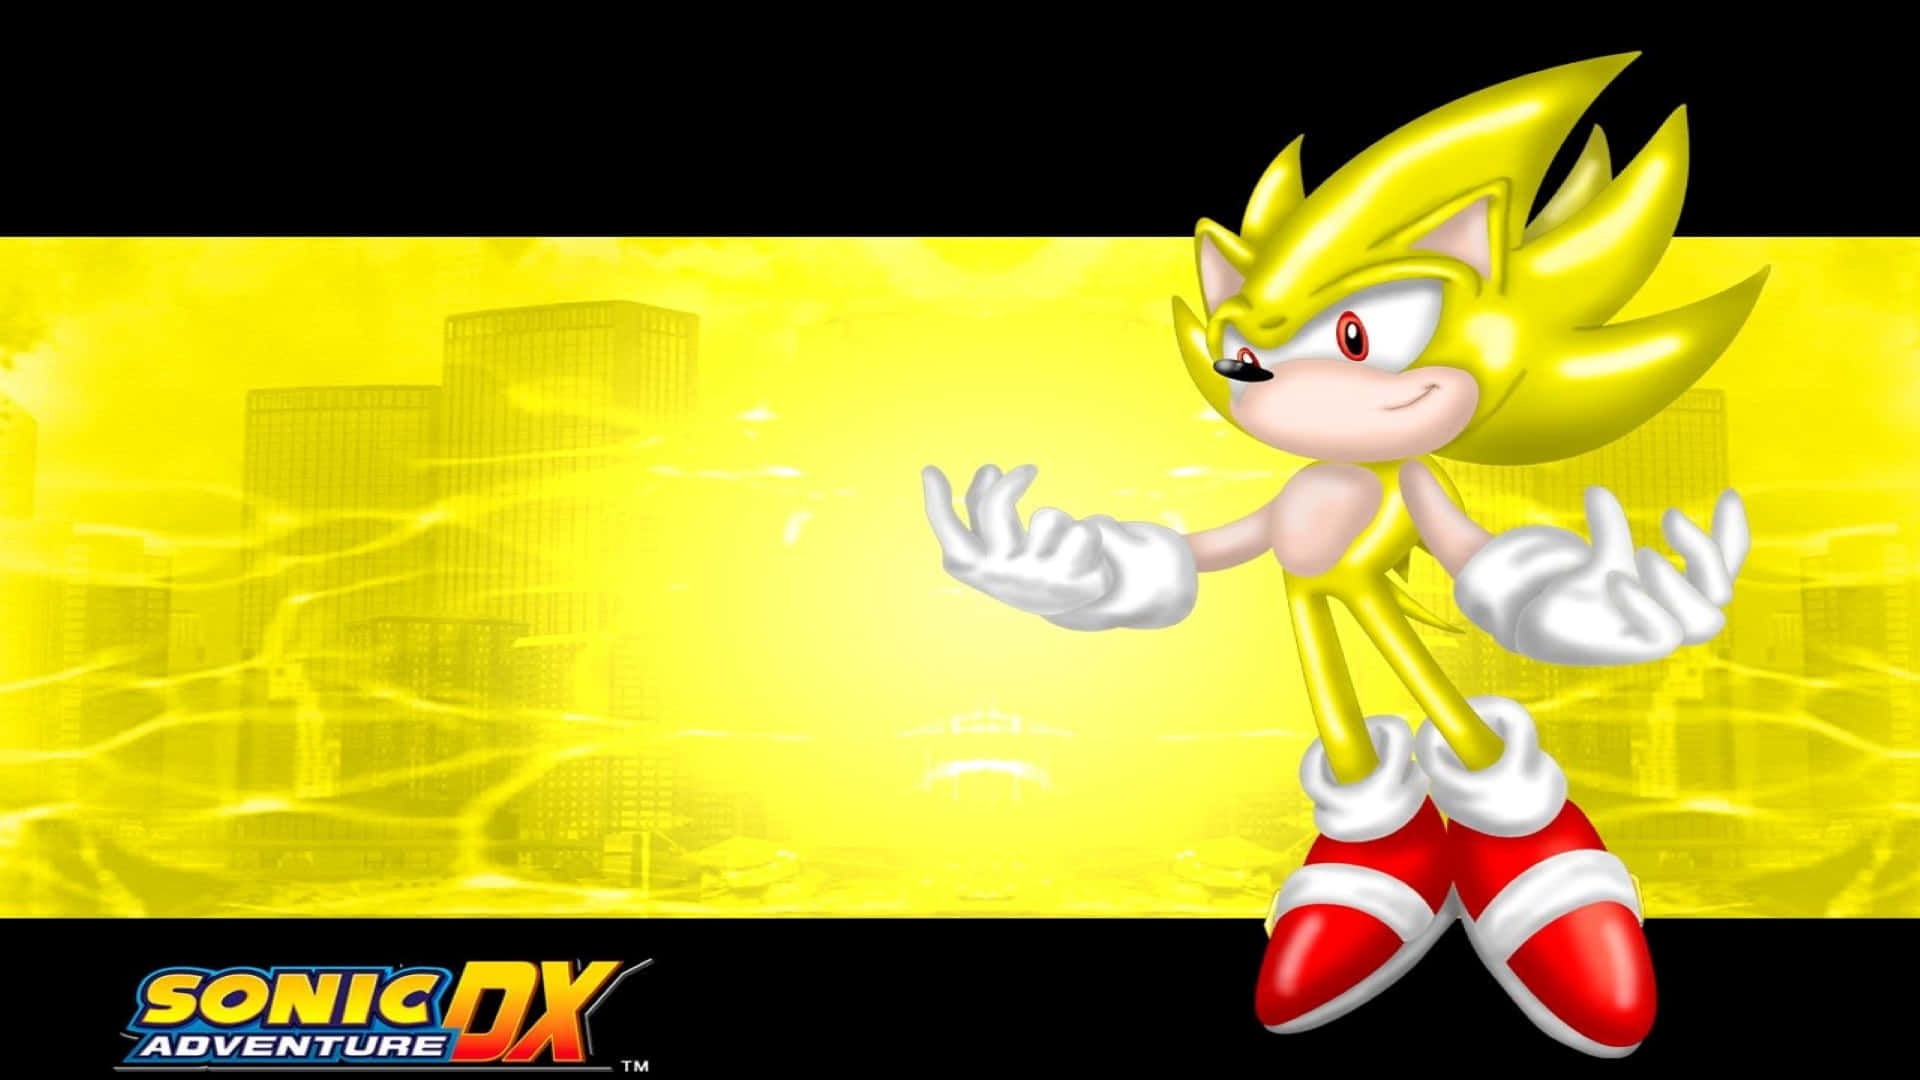 Sonic Adventure HD - Sonic the Hedgehog in action Wallpaper